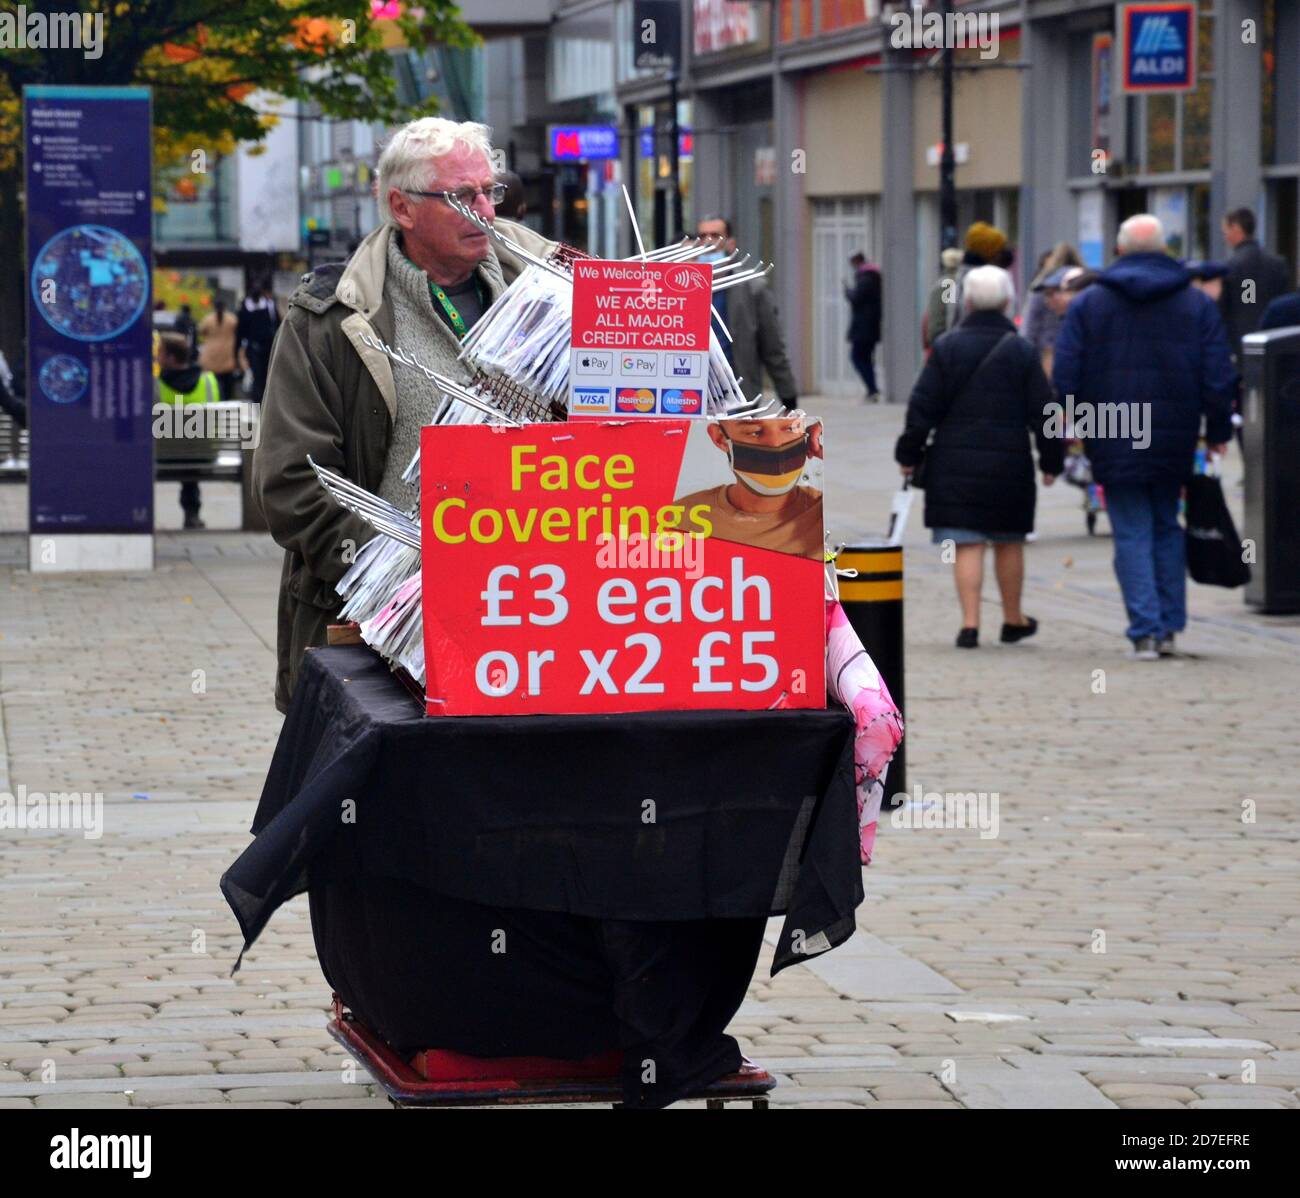 Covid 19 or coronavirus signage and advertising in Manchester, Greater Manchester, England, United Kingdom. A man sells face coverings and masks on Market Street, central Manchester. Stock Photo